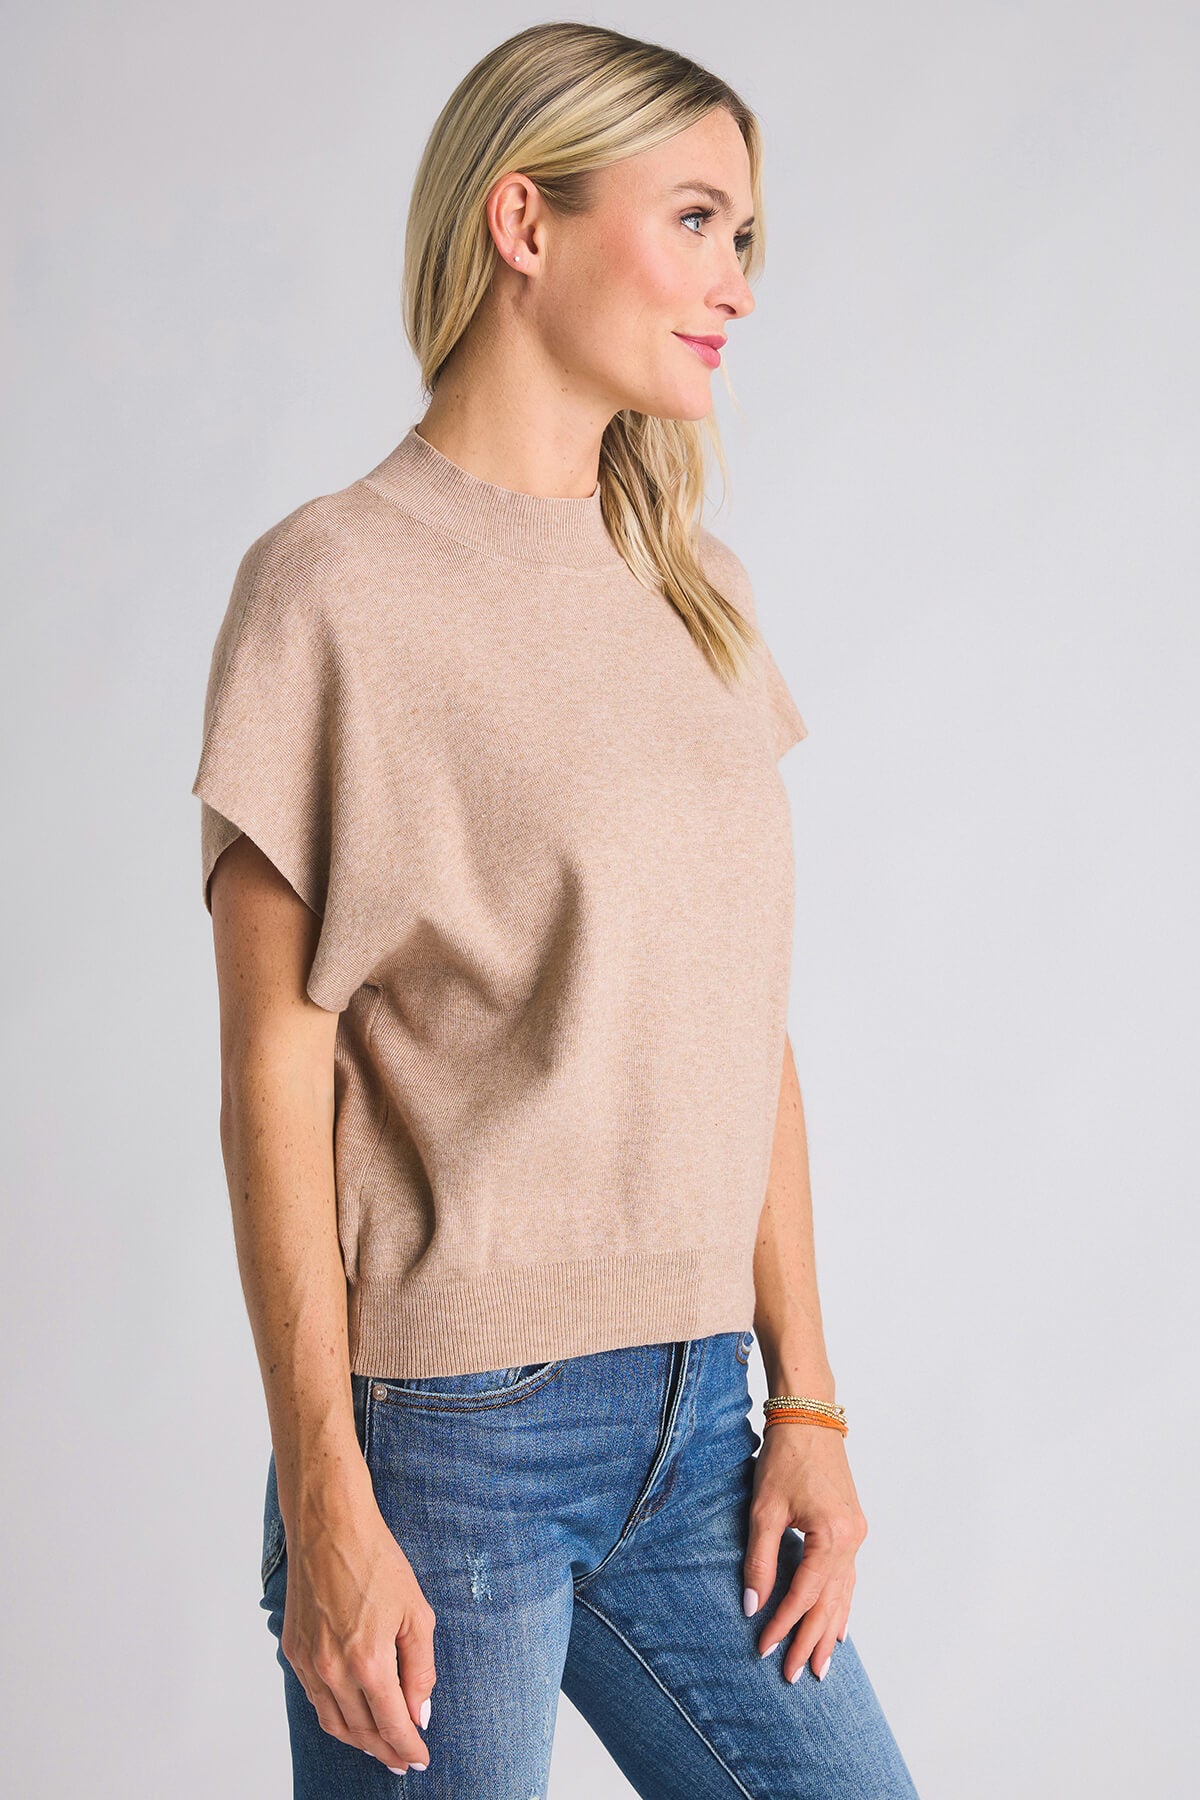 Eesome Mockneck Sleeveless Knit Sweater – Social Threads